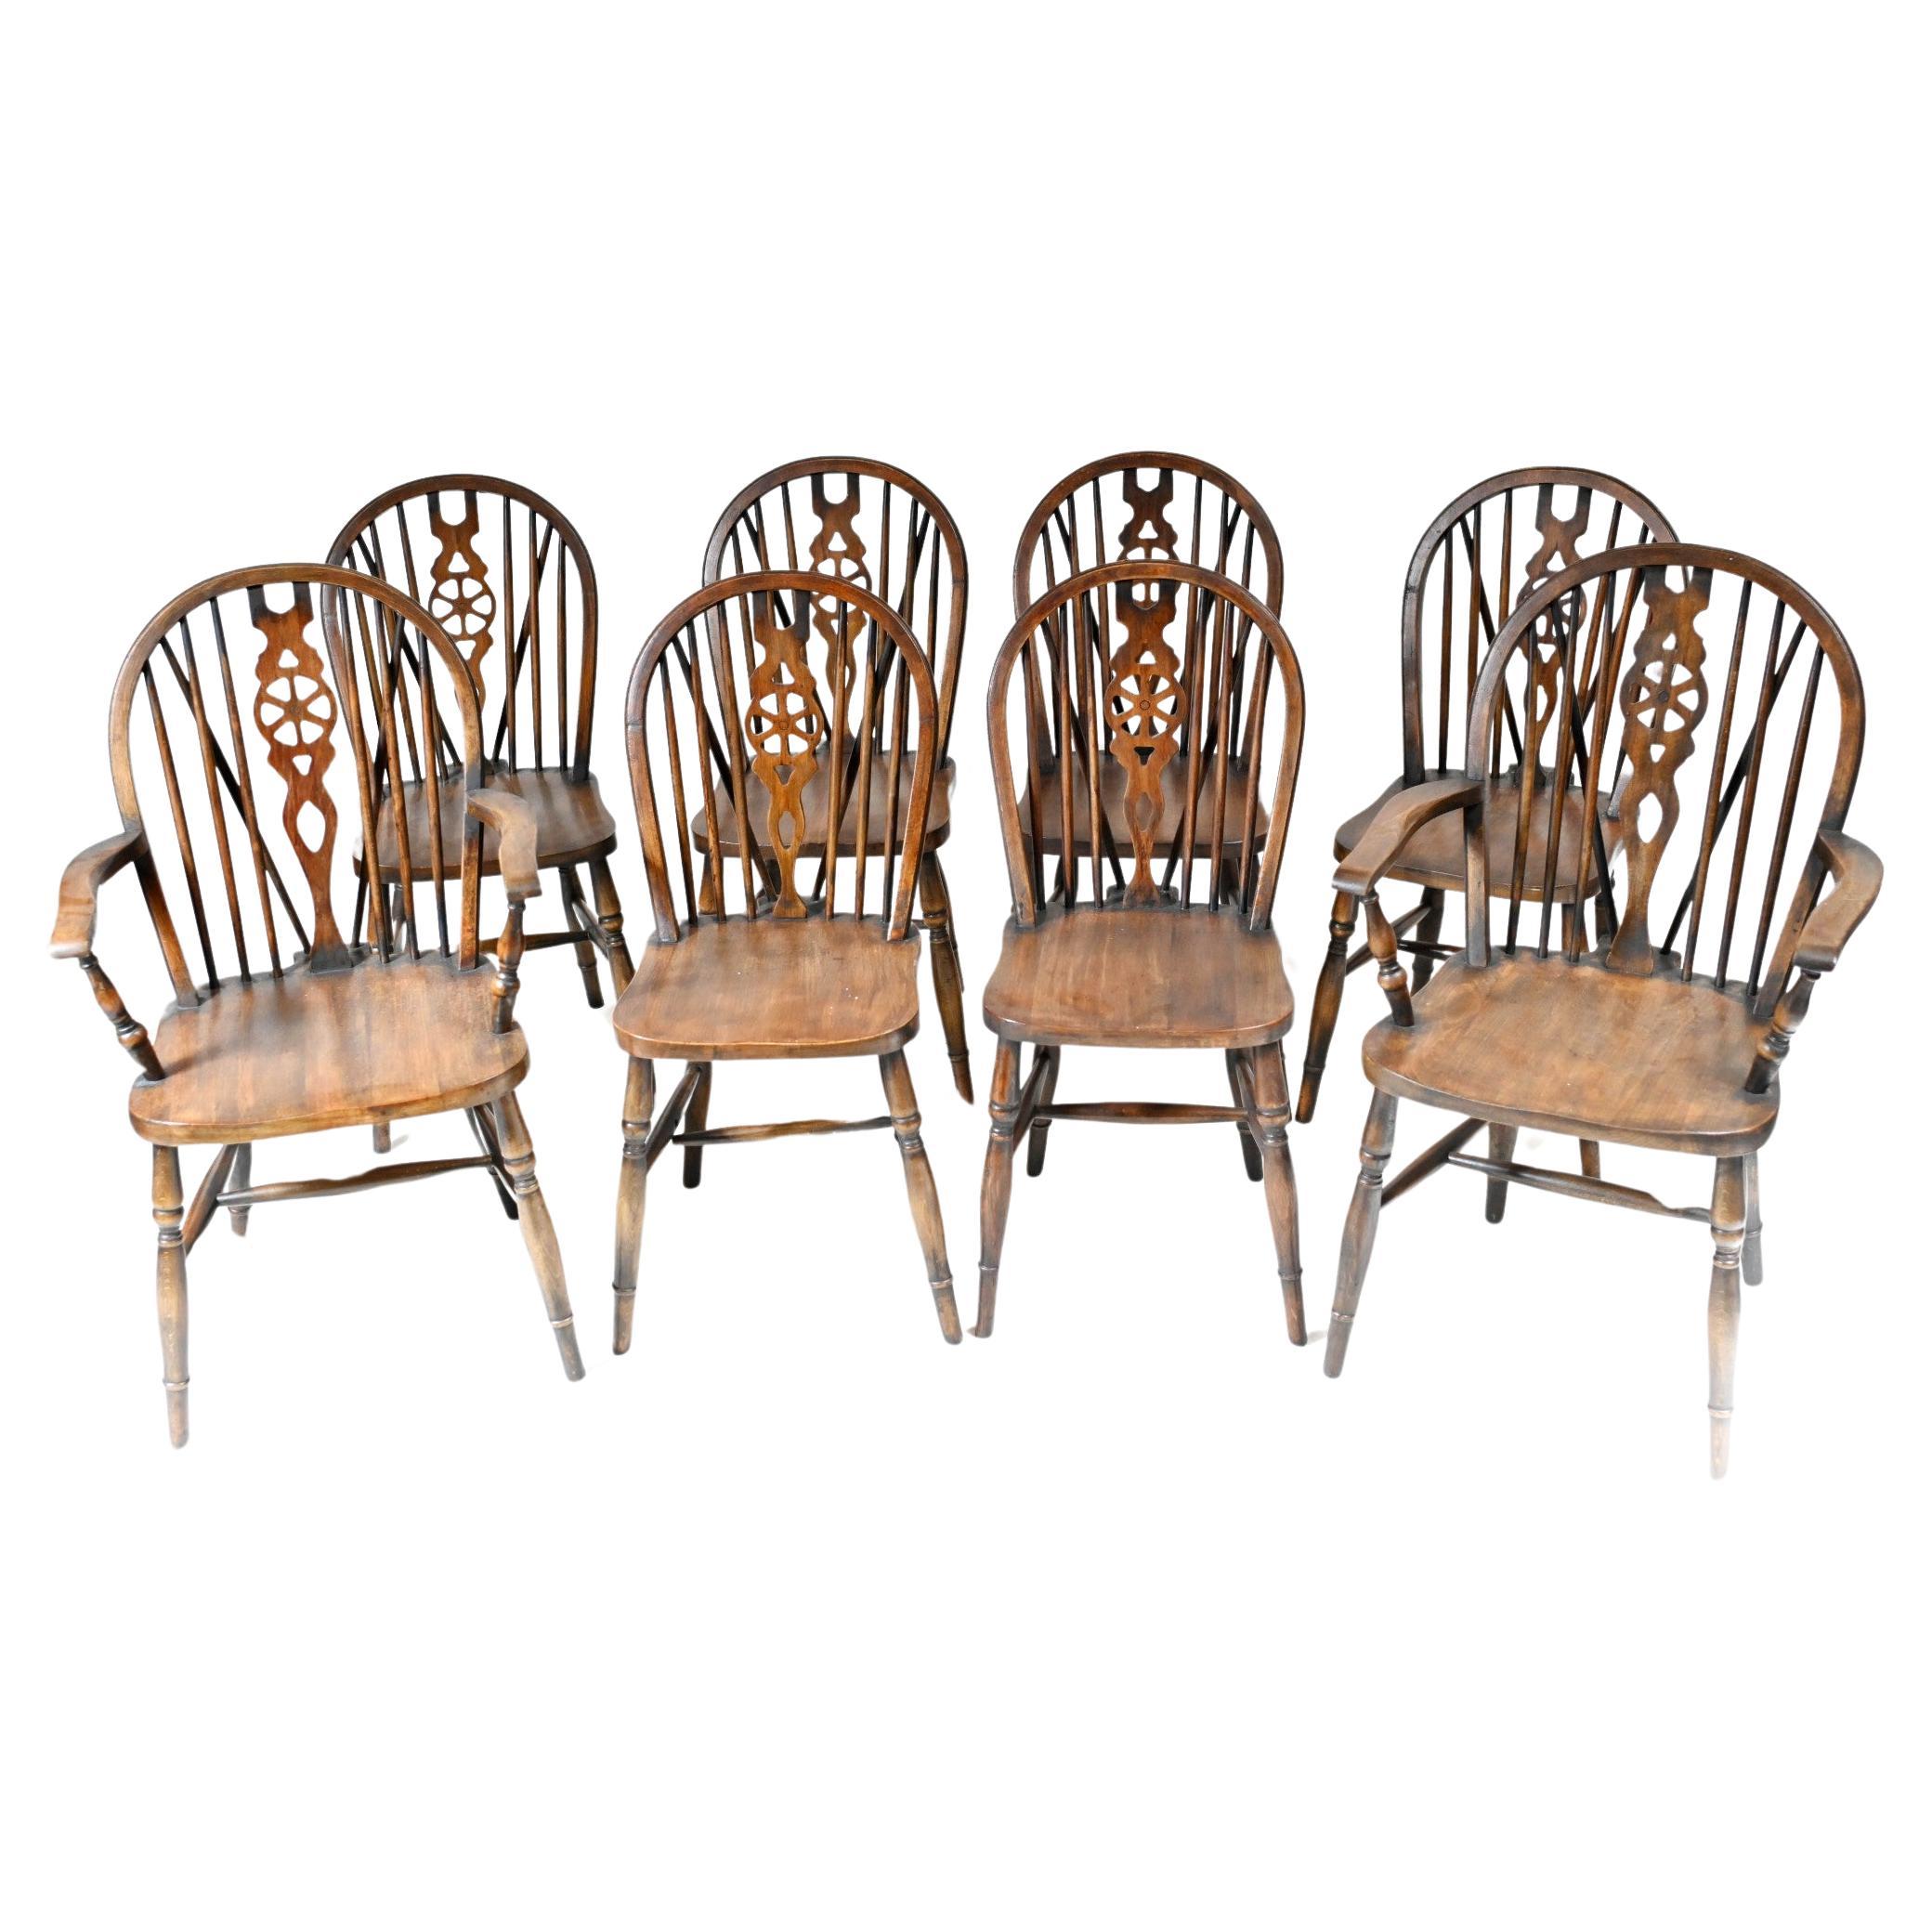 Set 8 Antique Windsor Chairs Wheelback Kitchen Diners 1890 For Sale